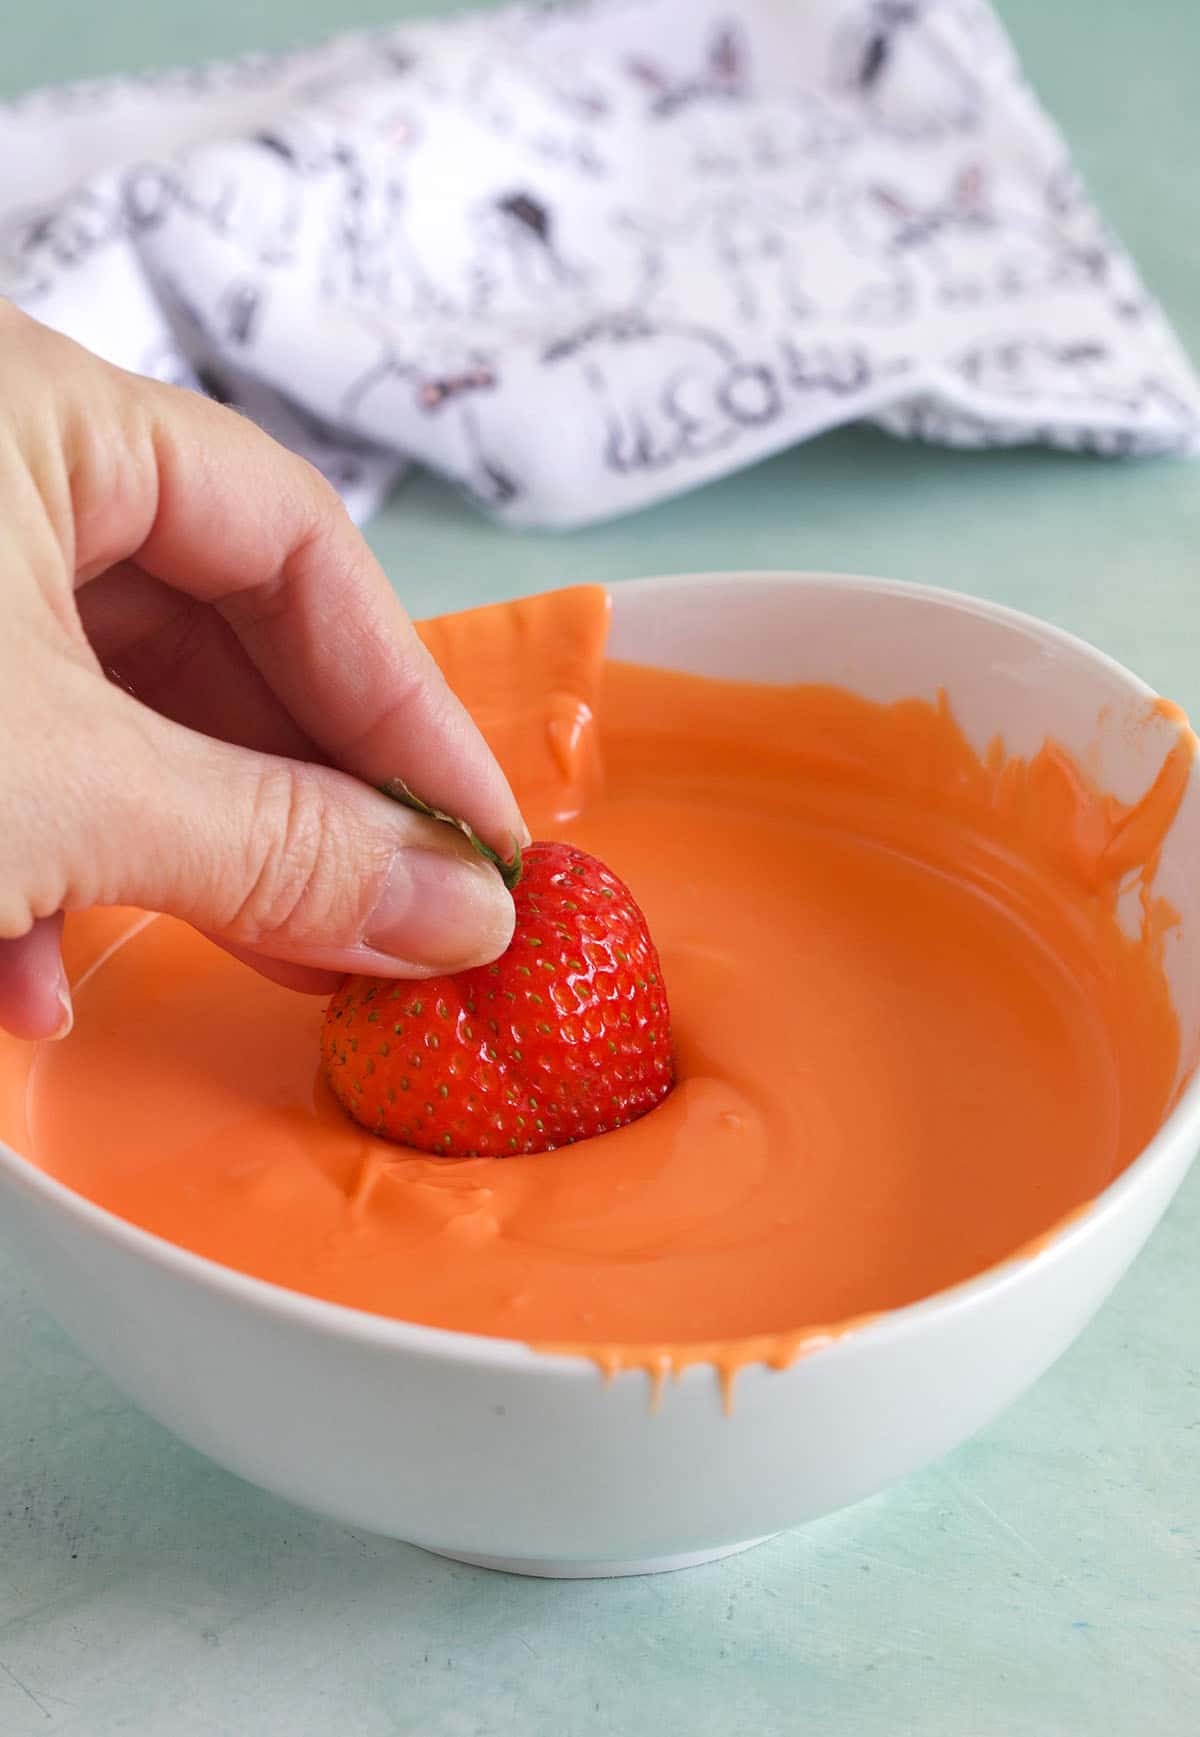 A strawberry is being dipped into a bowl of melted white chocolate that's been dyed orange.